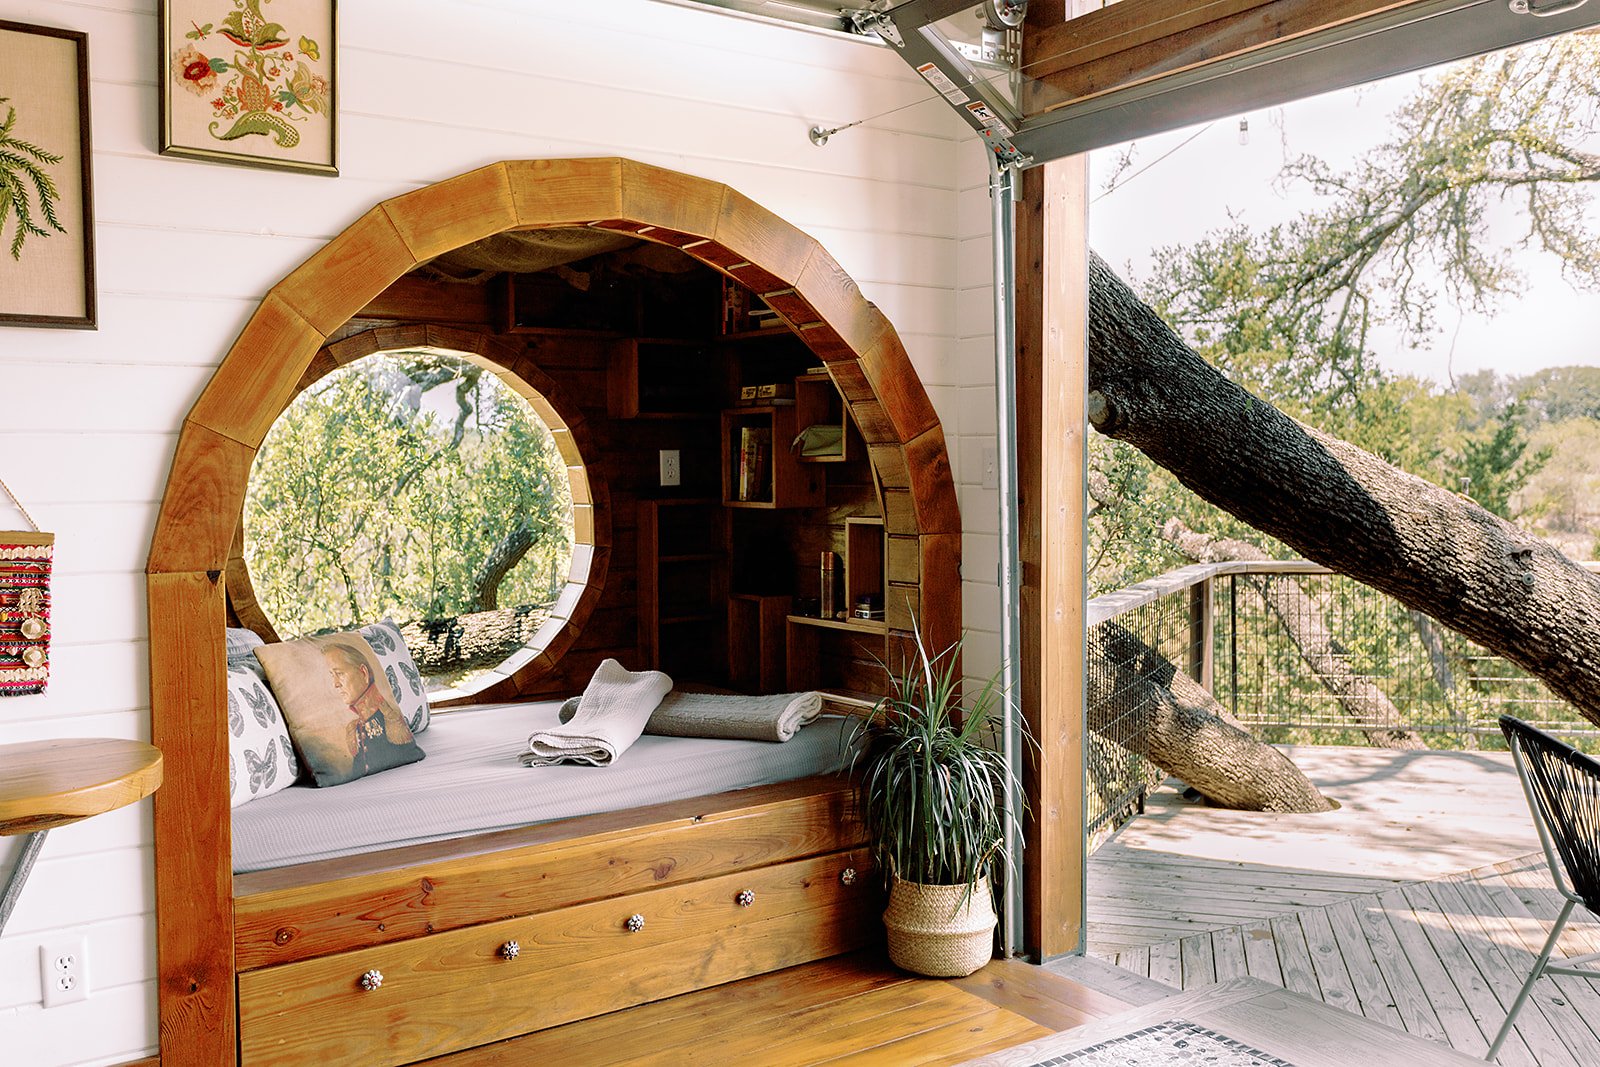 The Live Oak Treehouse at HoneyTree